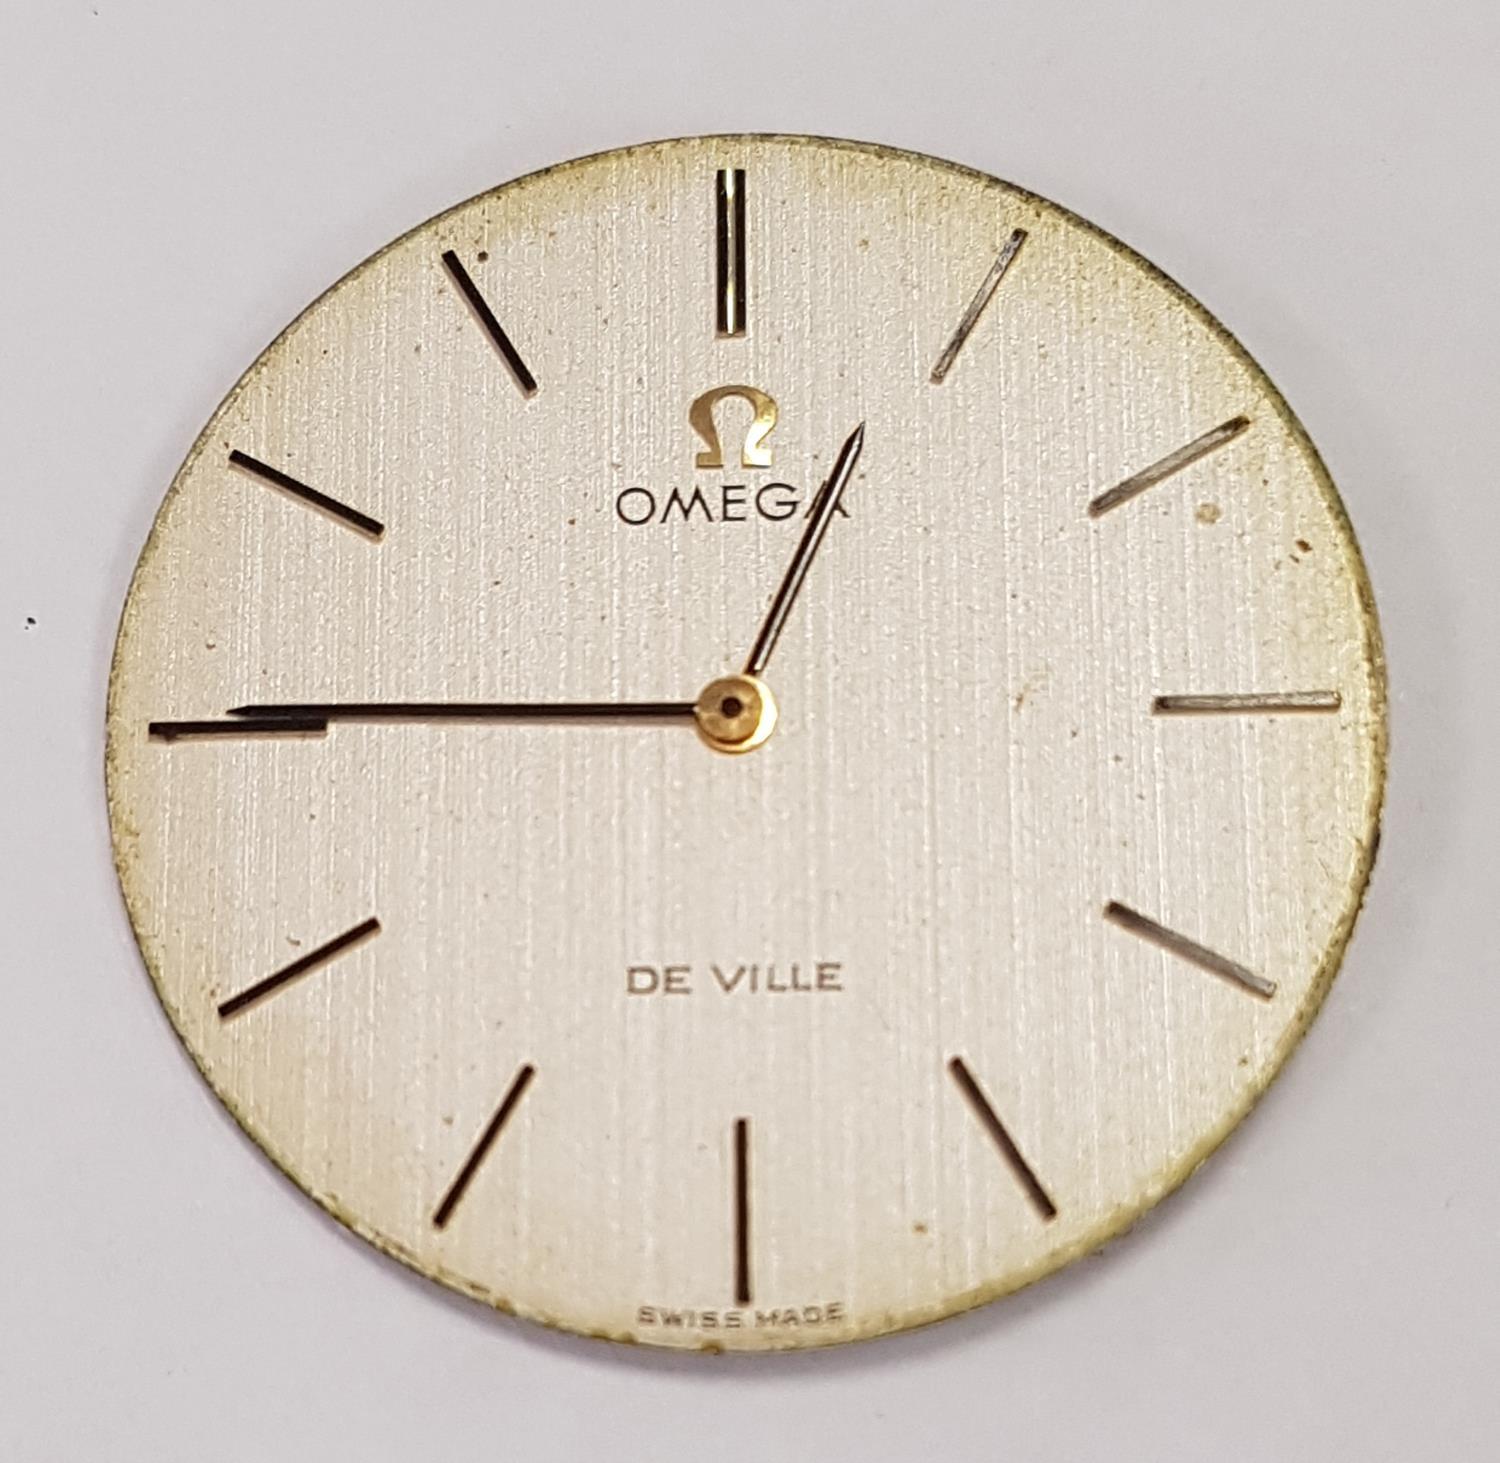 GENTLEMEN'S 1970s OMEGA DE VILLE NINE CARAT GOLD CASED WRISTWATCH the champagne dial with baton five - Image 2 of 8